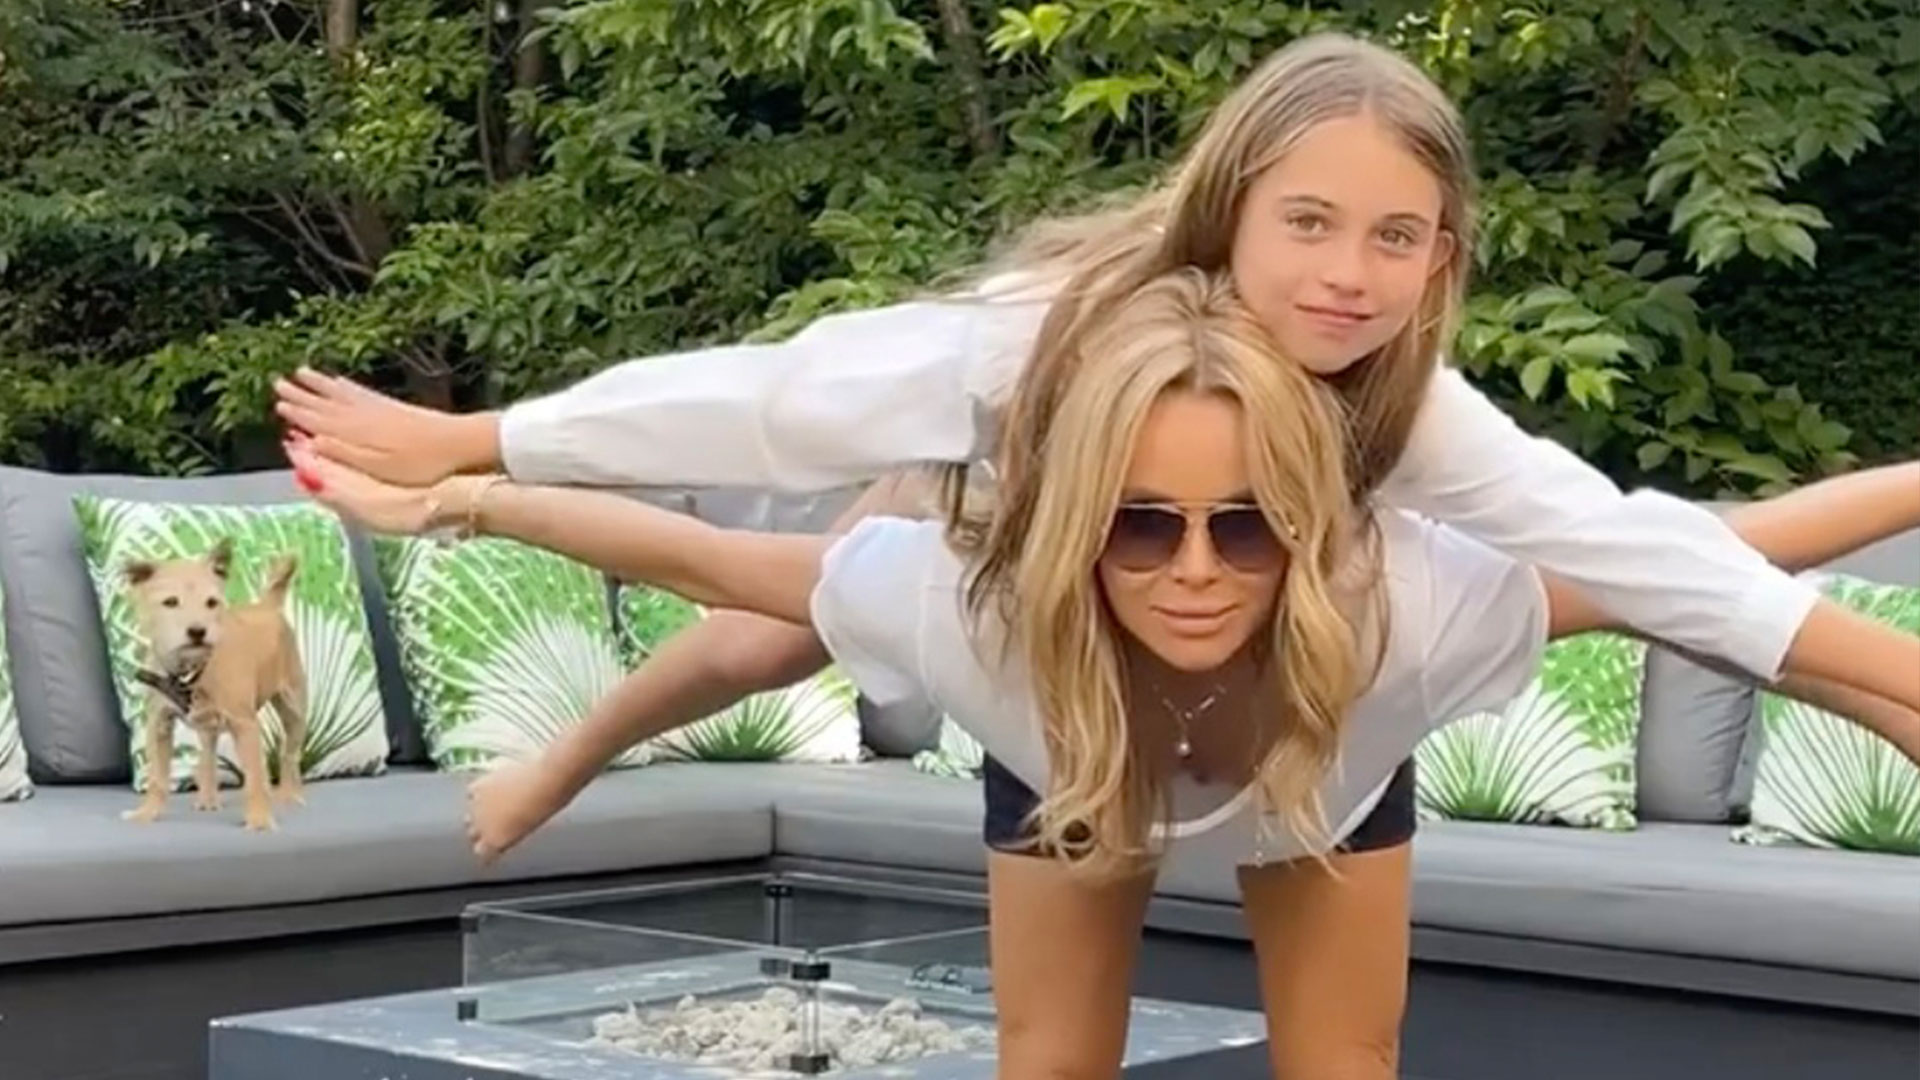 Amanda Holden shows off her toned legs and amazing tum while doing a headstand together with lookalike daughter